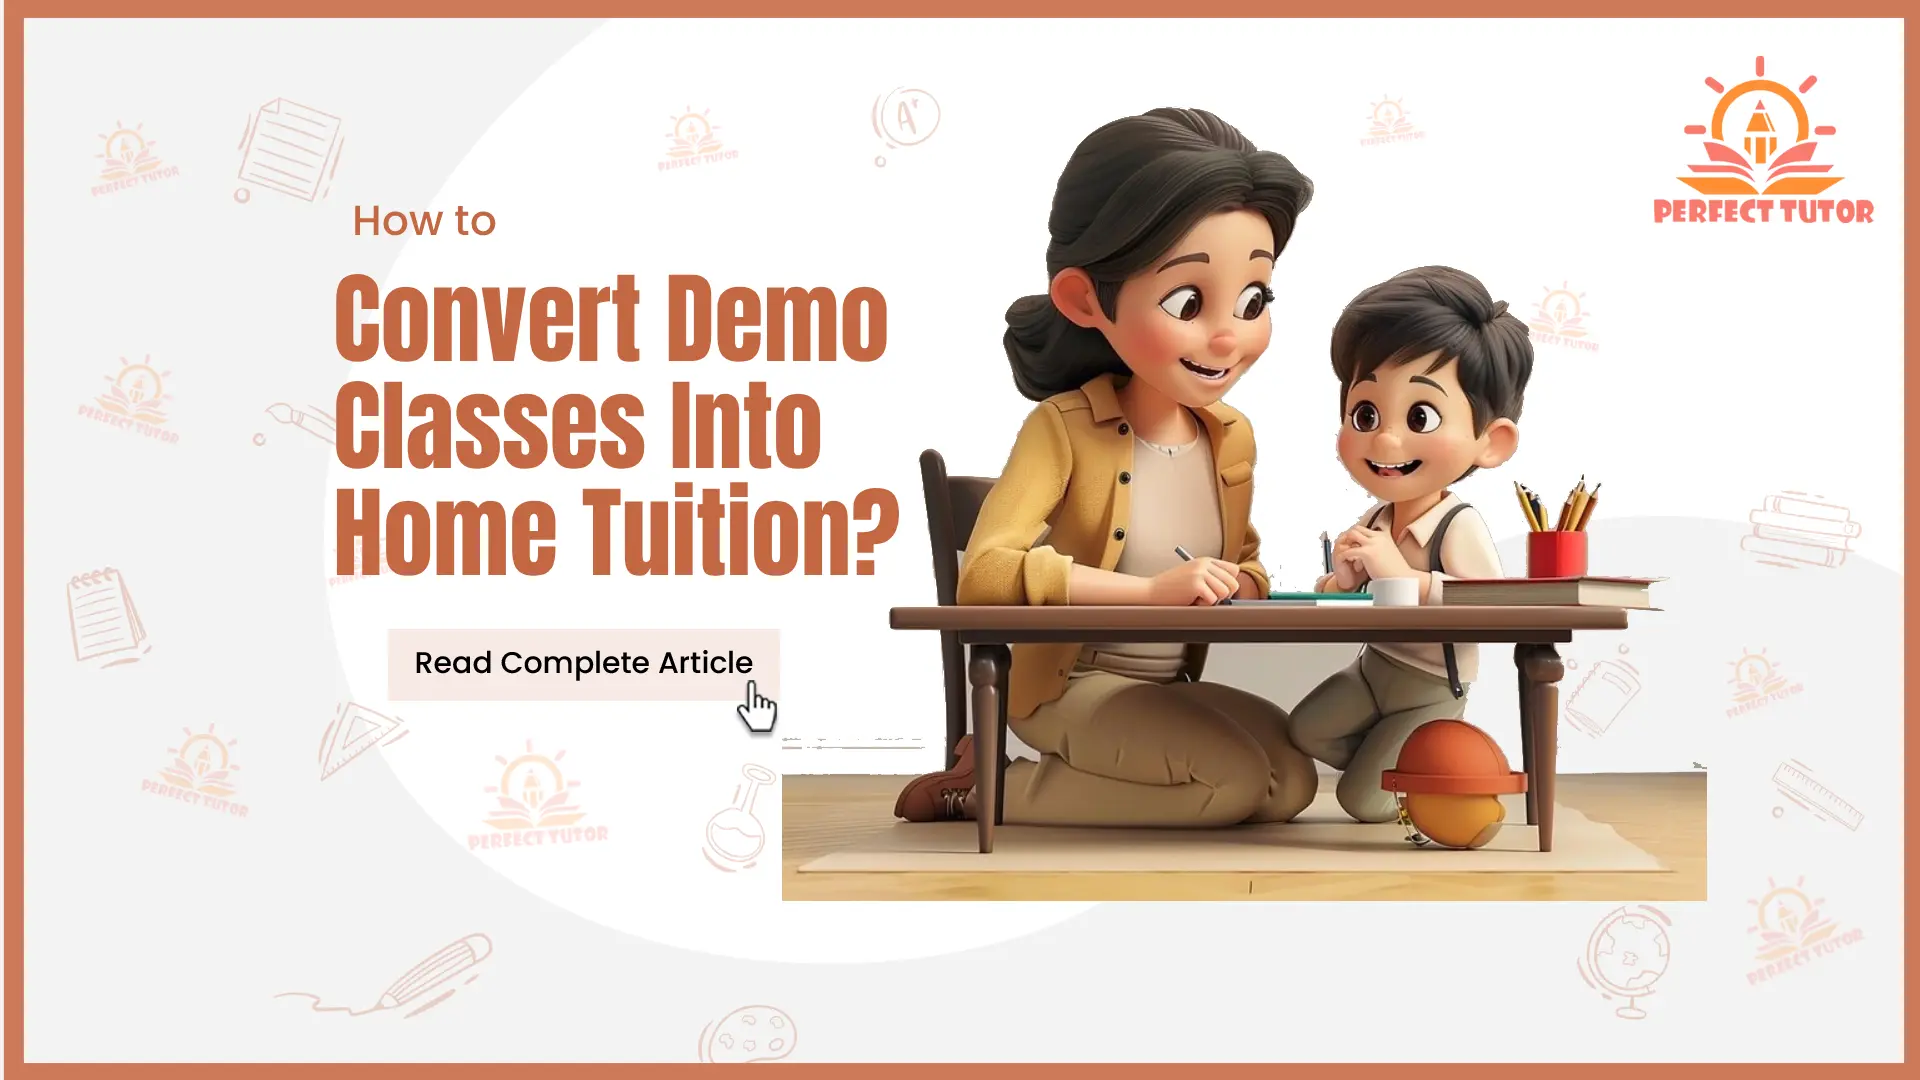 How to Convert Demo Classes Into Home Tuition